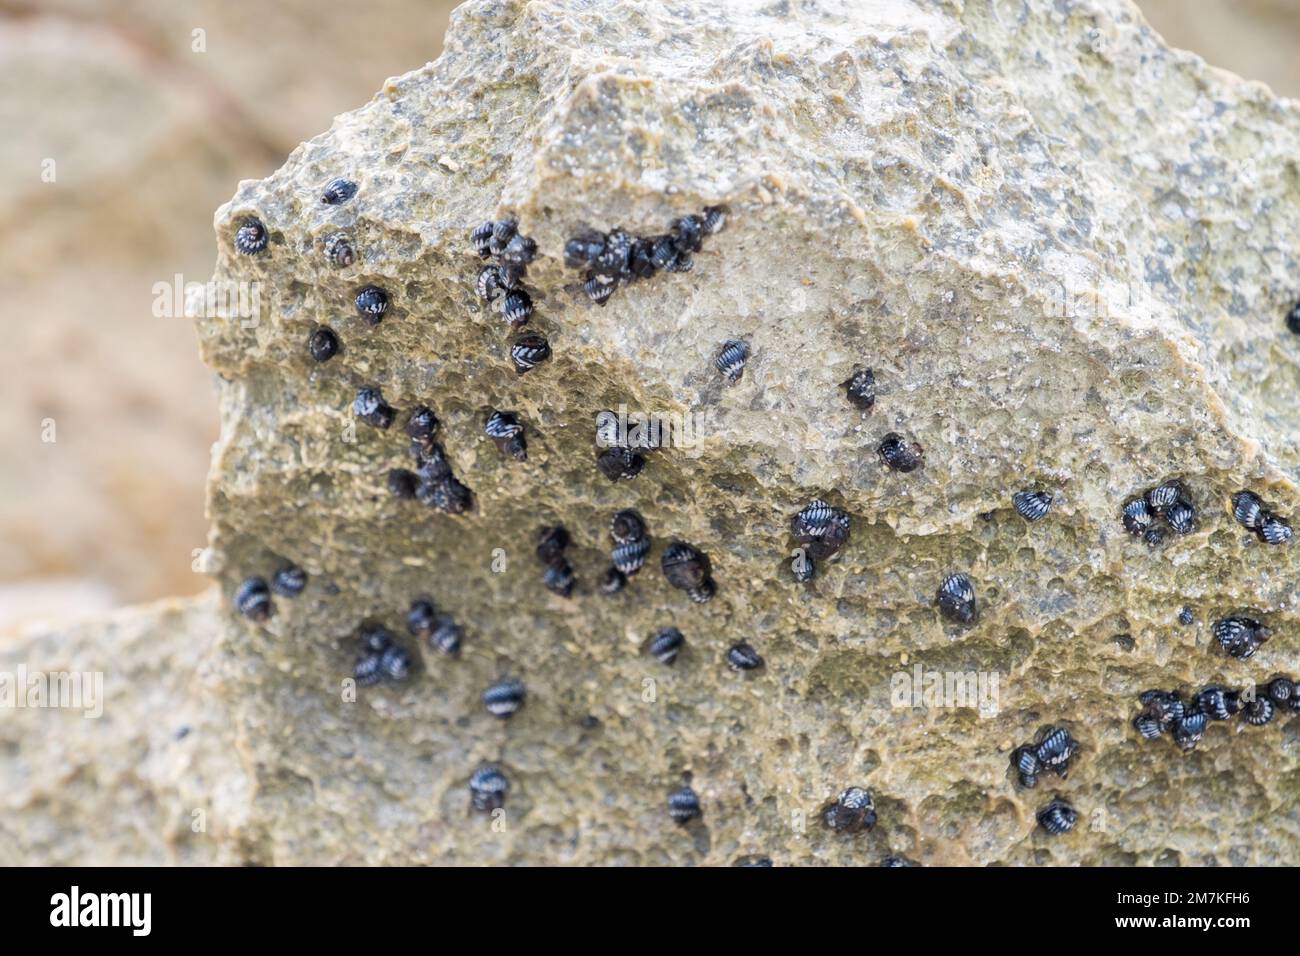 Details of hundreds of small dark blue sea snails attached to a rock in the Limestone Bay area of Anguilla Stock Photo